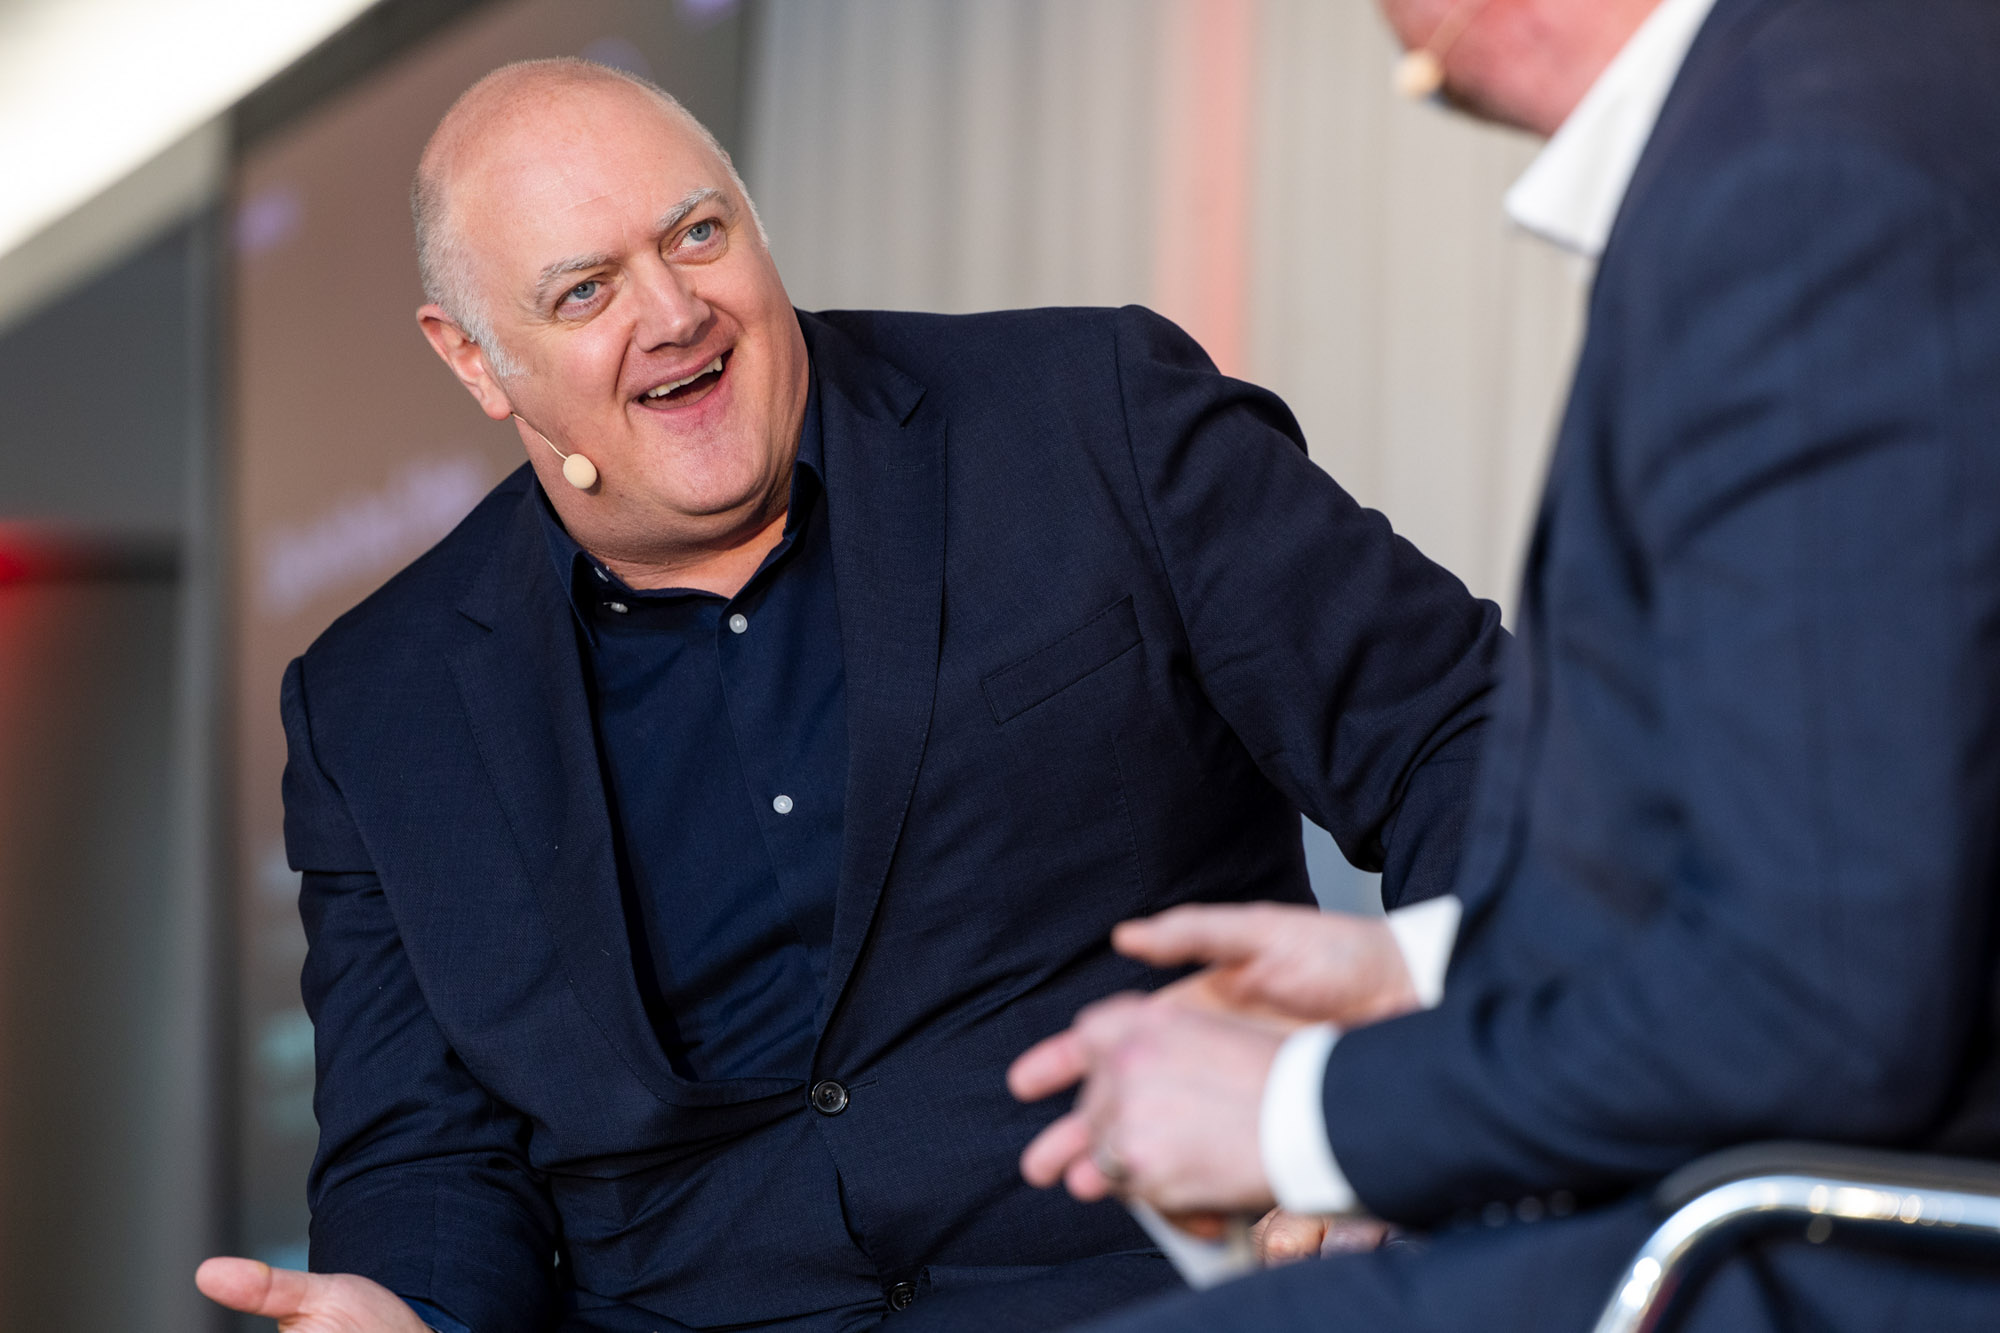 Dara O Briain, interview on stage, corporate event photography Dublin